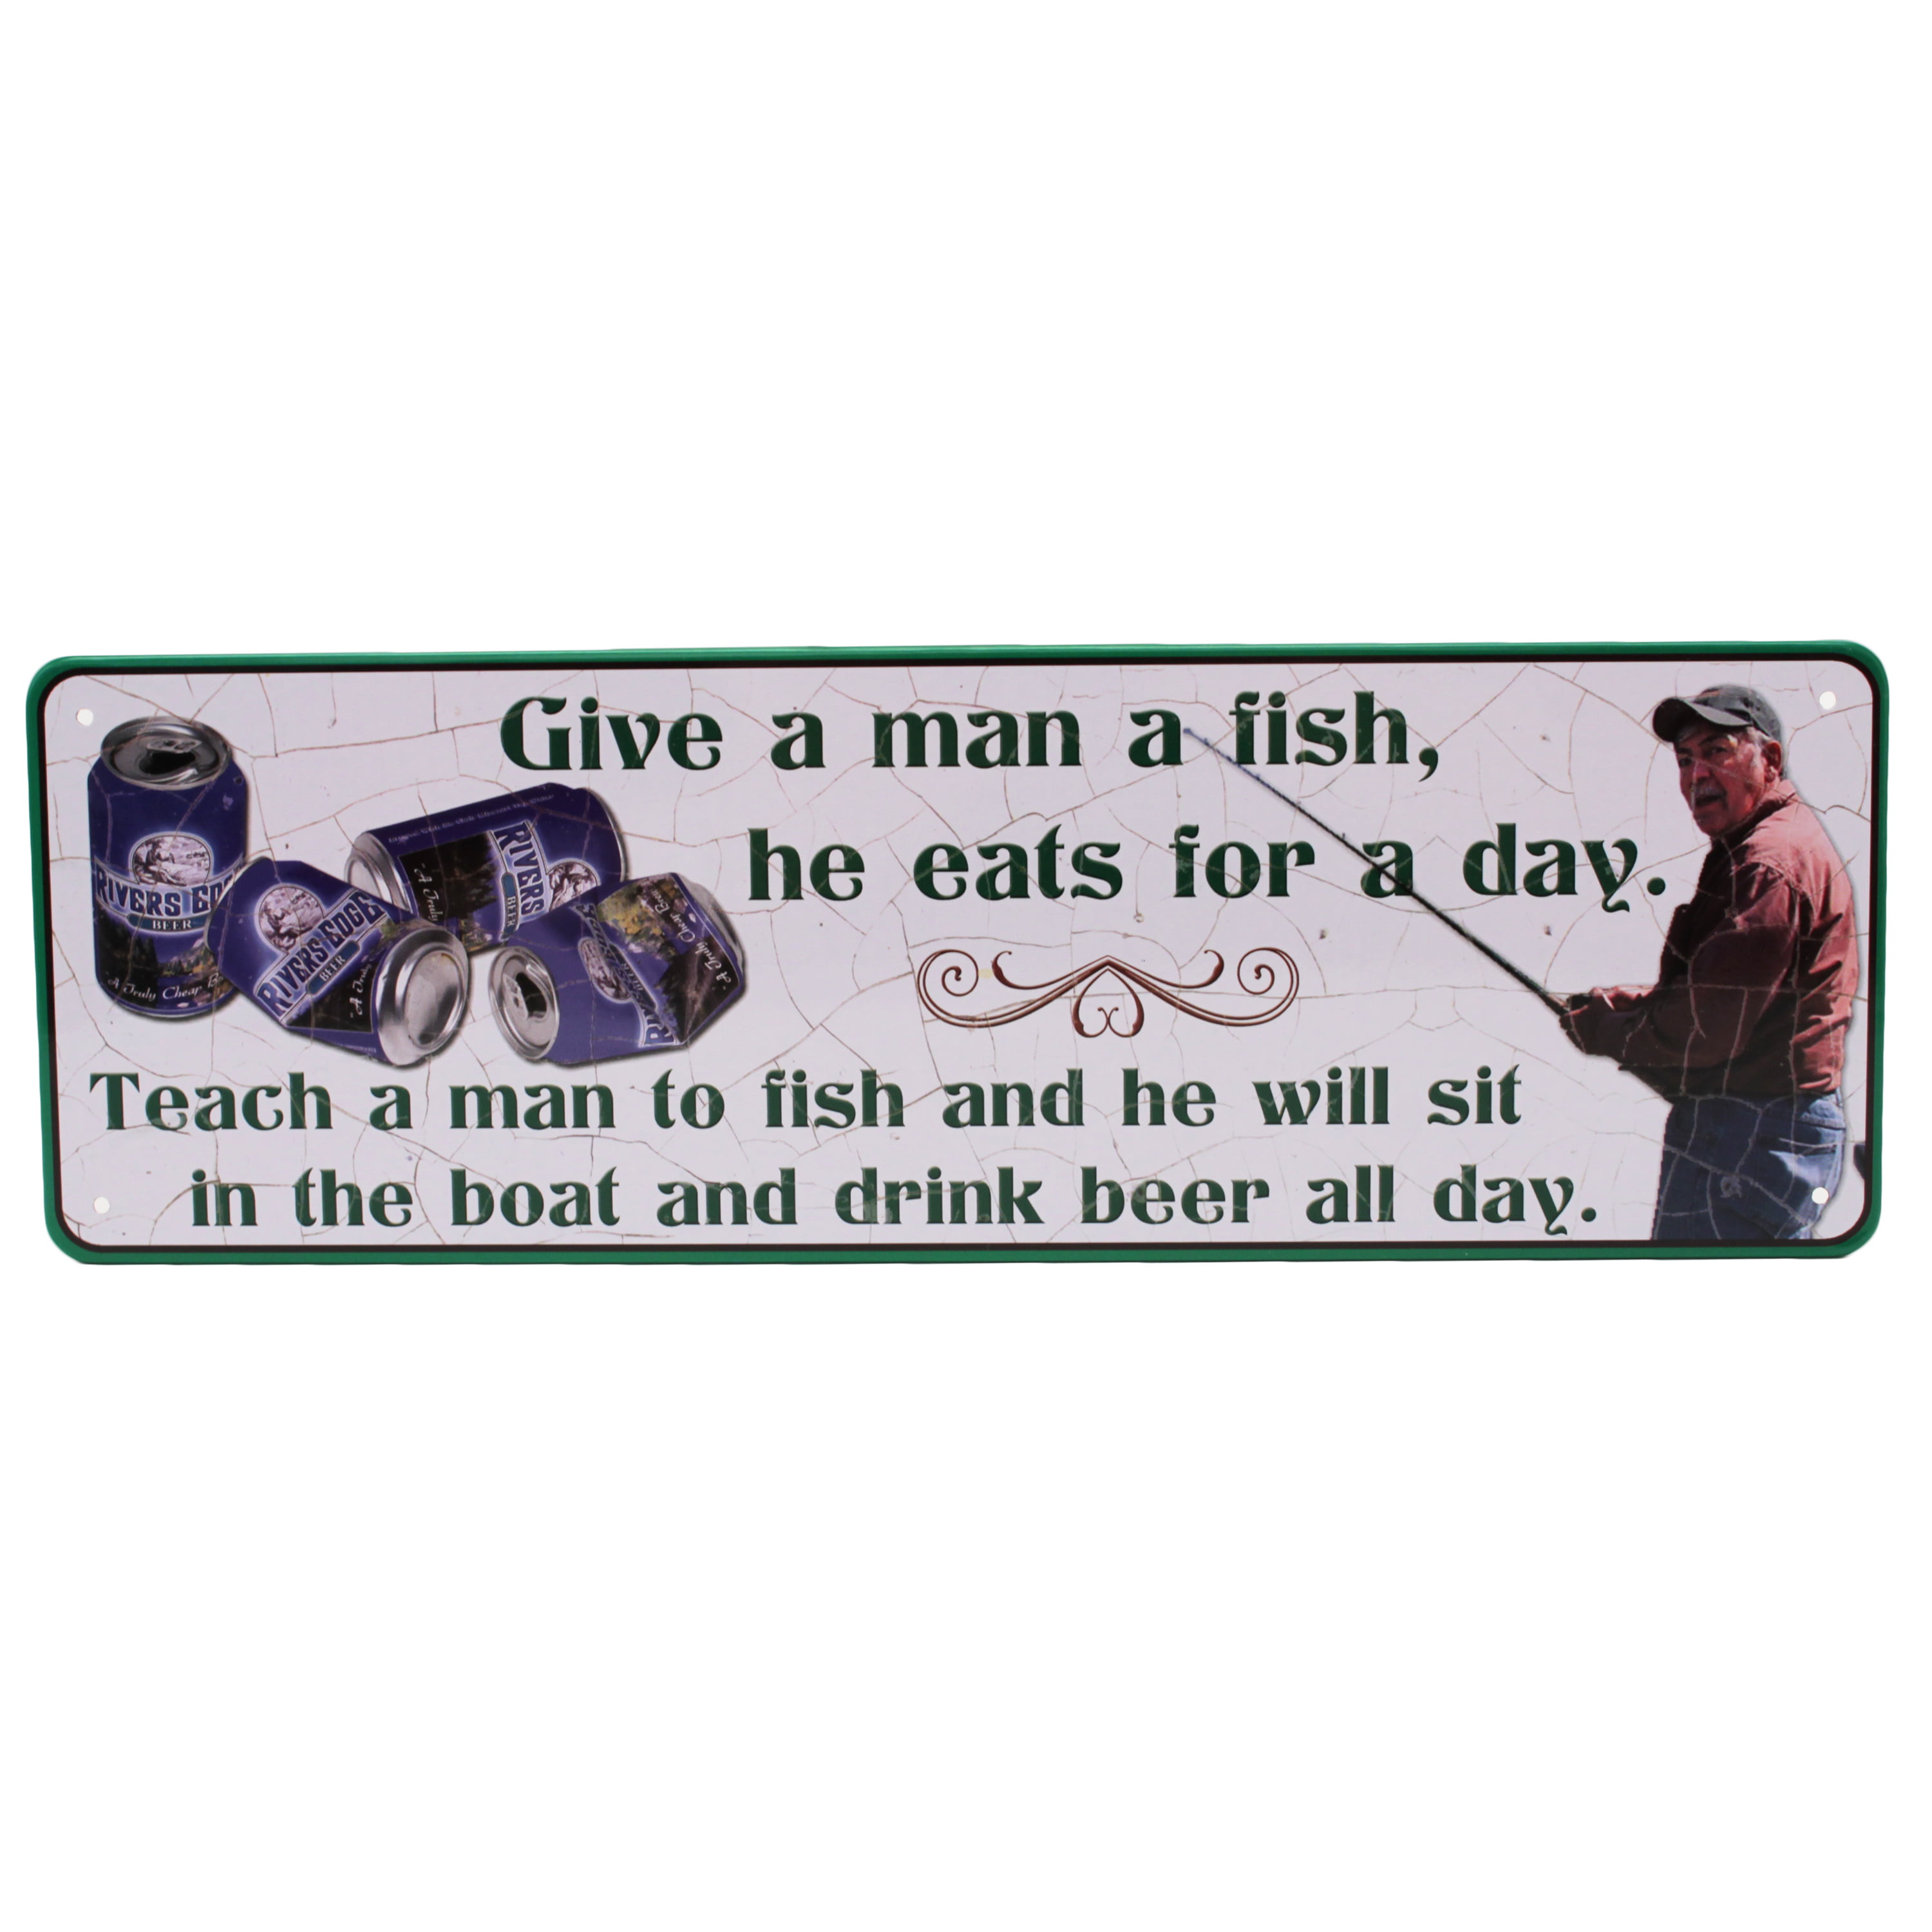 10.5" x 3.5" Tin Metal Sign Wall Give Teach Man to Fish Drink Beer Boat All Day